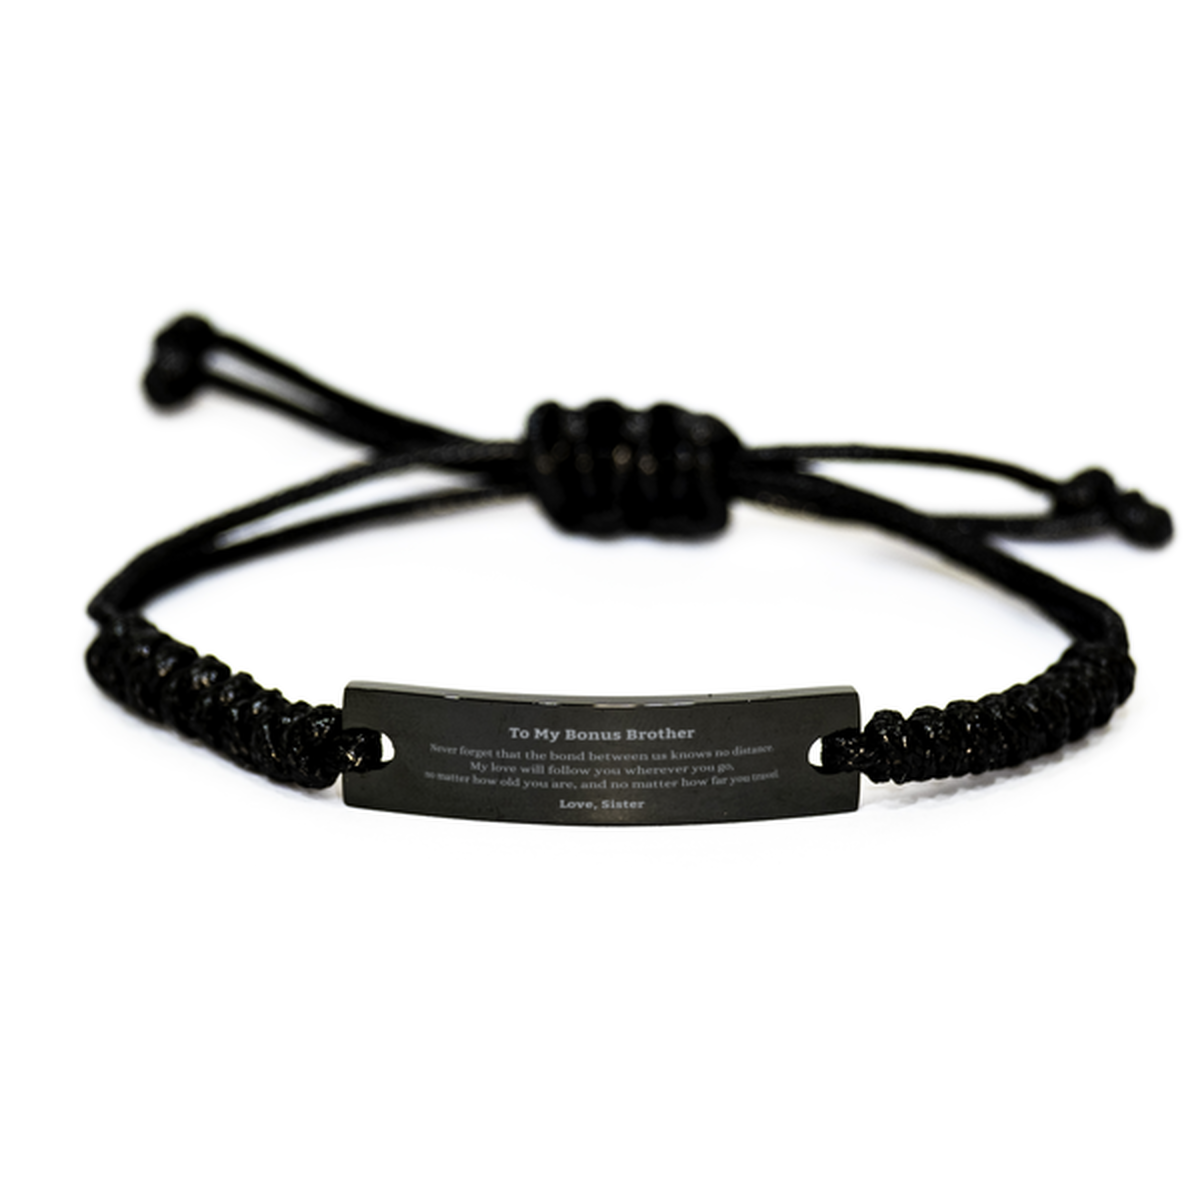 Bonus Brother Birthday Gifts from Sister, Adjustable Black Rope Bracelet for Bonus Brother Christmas Graduation Unique Gifts Bonus Brother Never forget that the bond between us knows no distance. Love, Sister